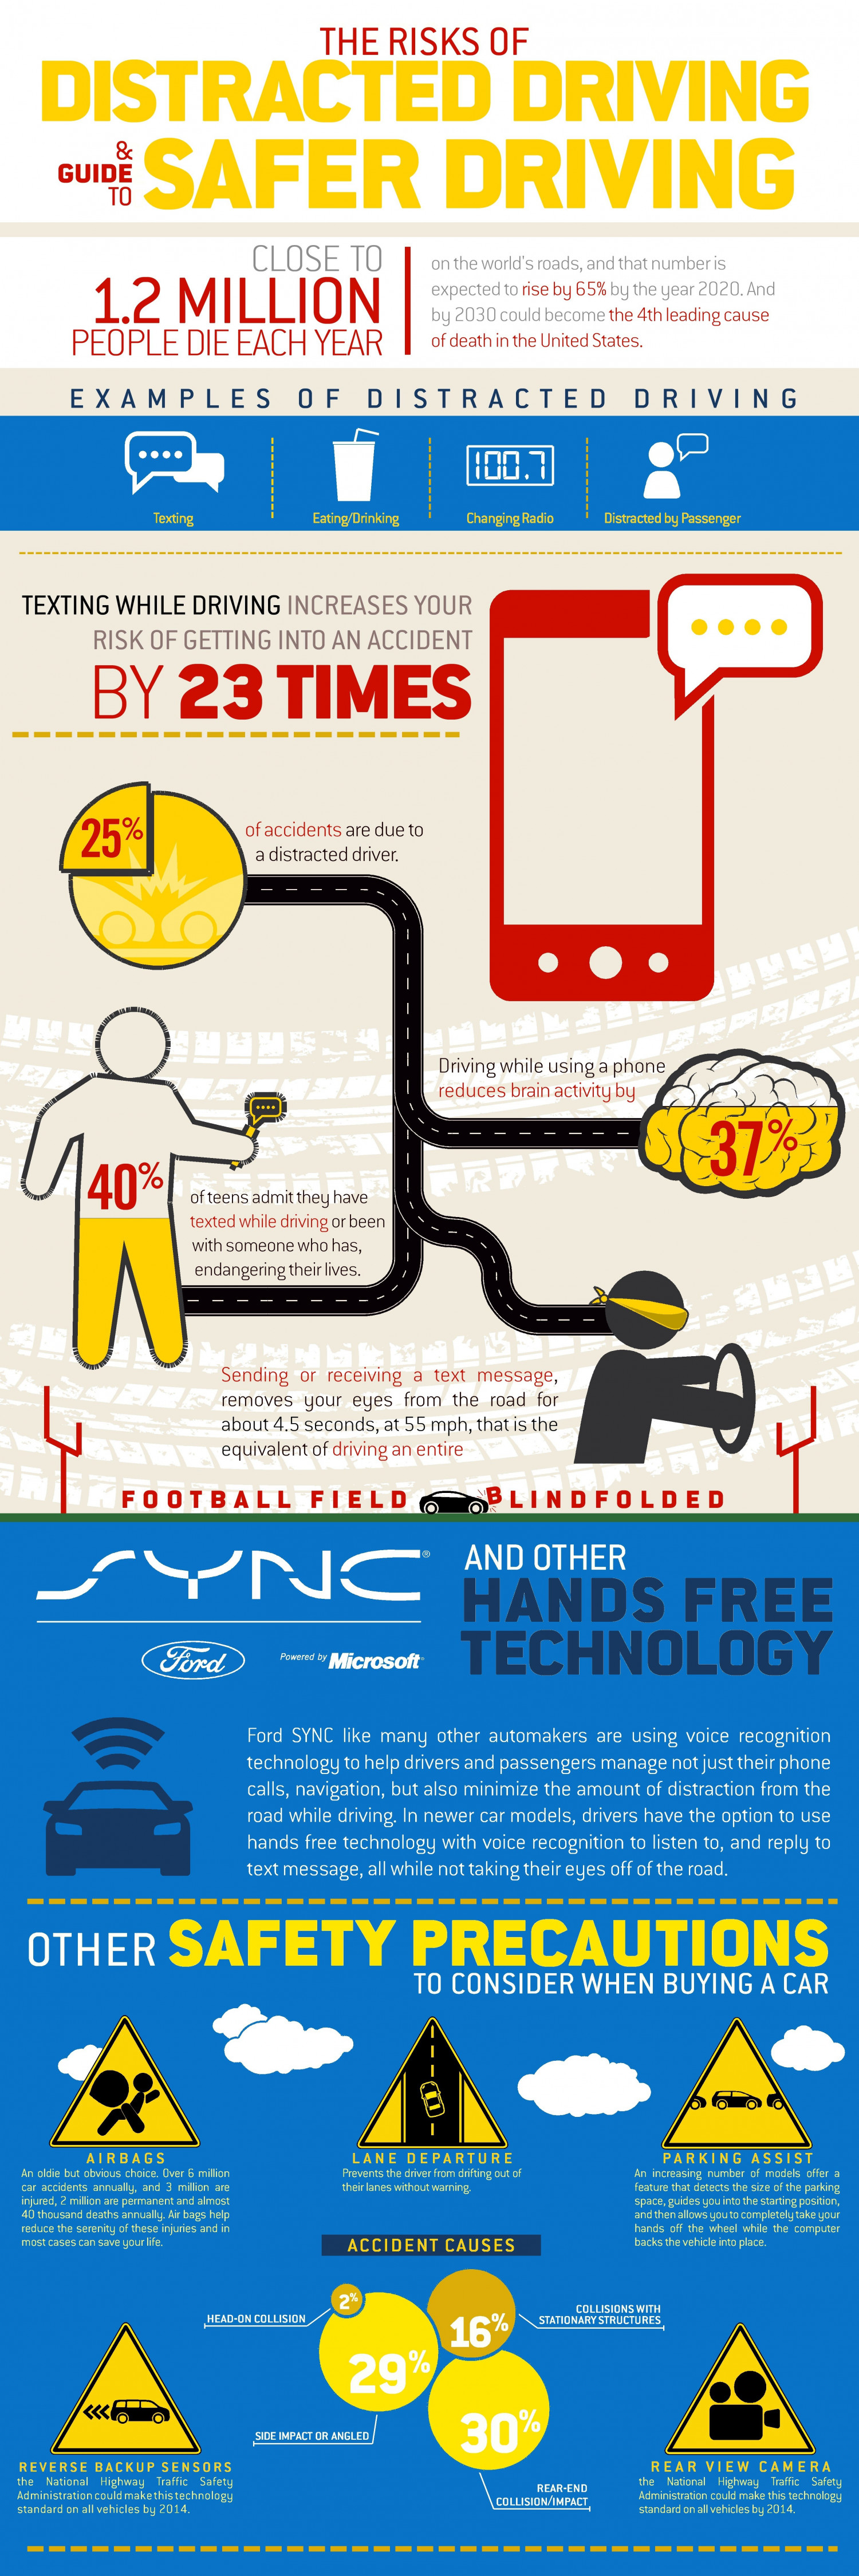 Distracted Driving Dangers Infographic